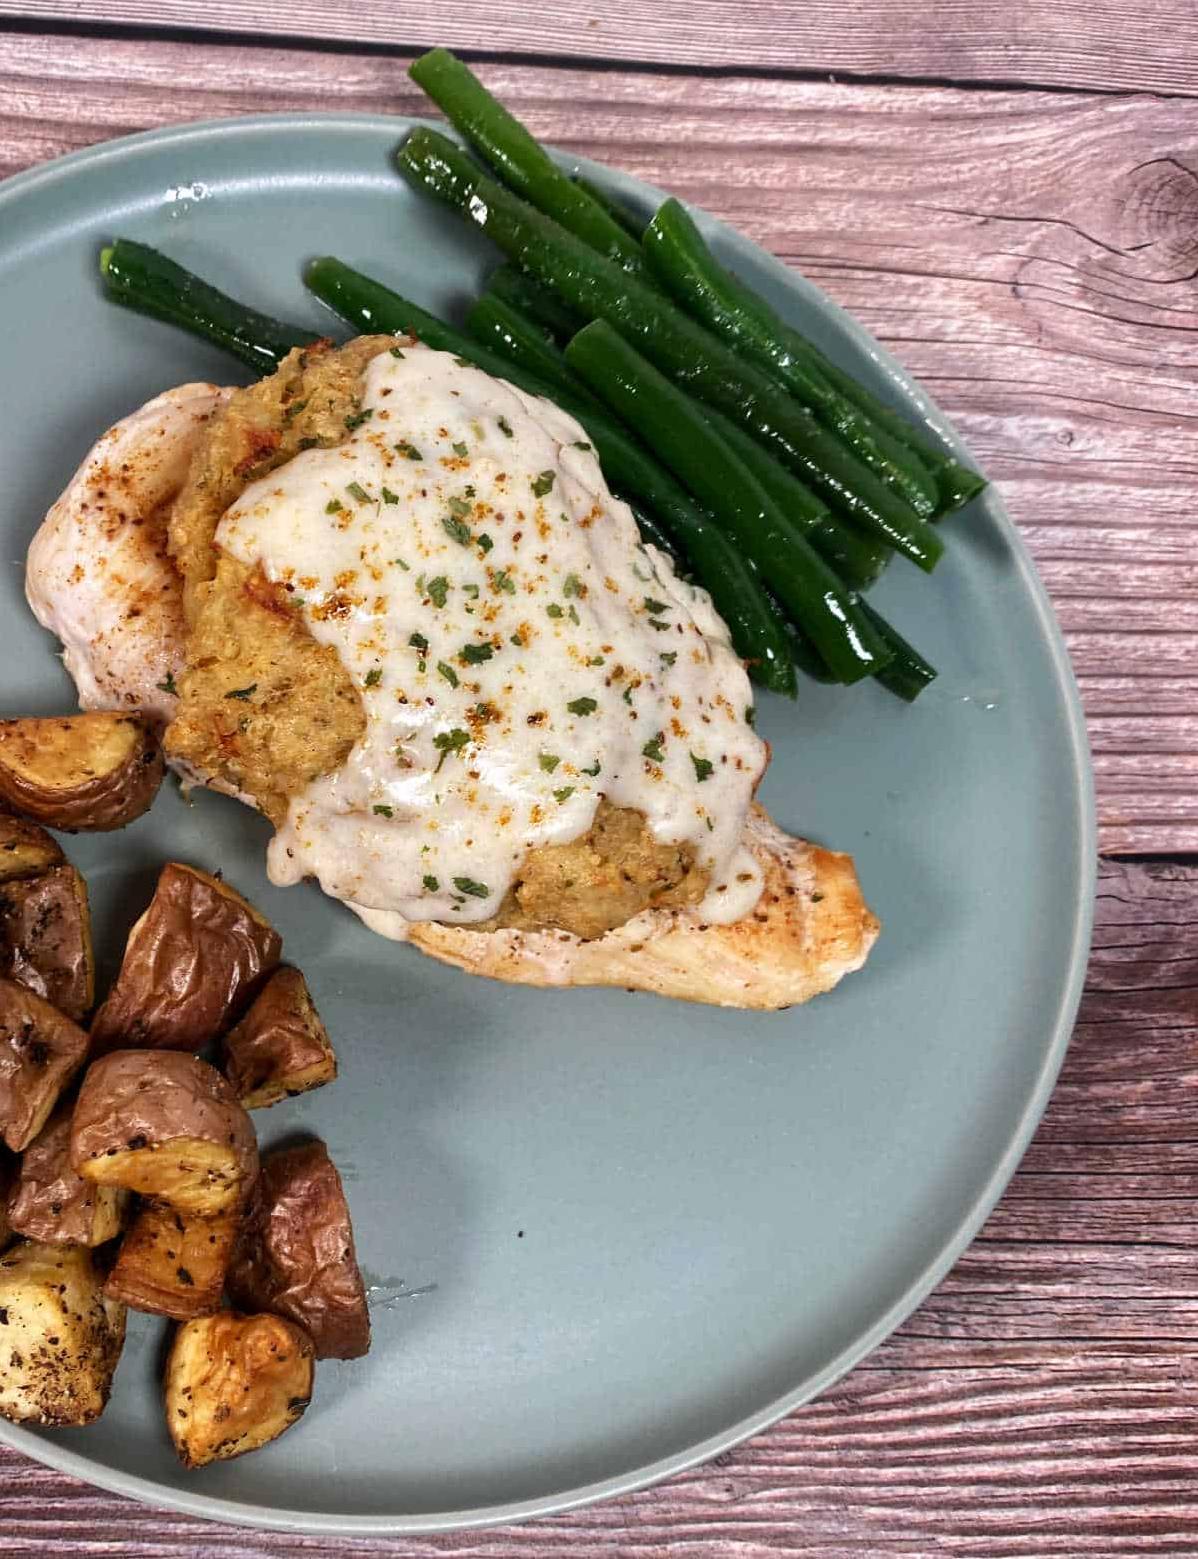  This chicken is seasoned to impress with Old Bay - a Chesapeake classic.